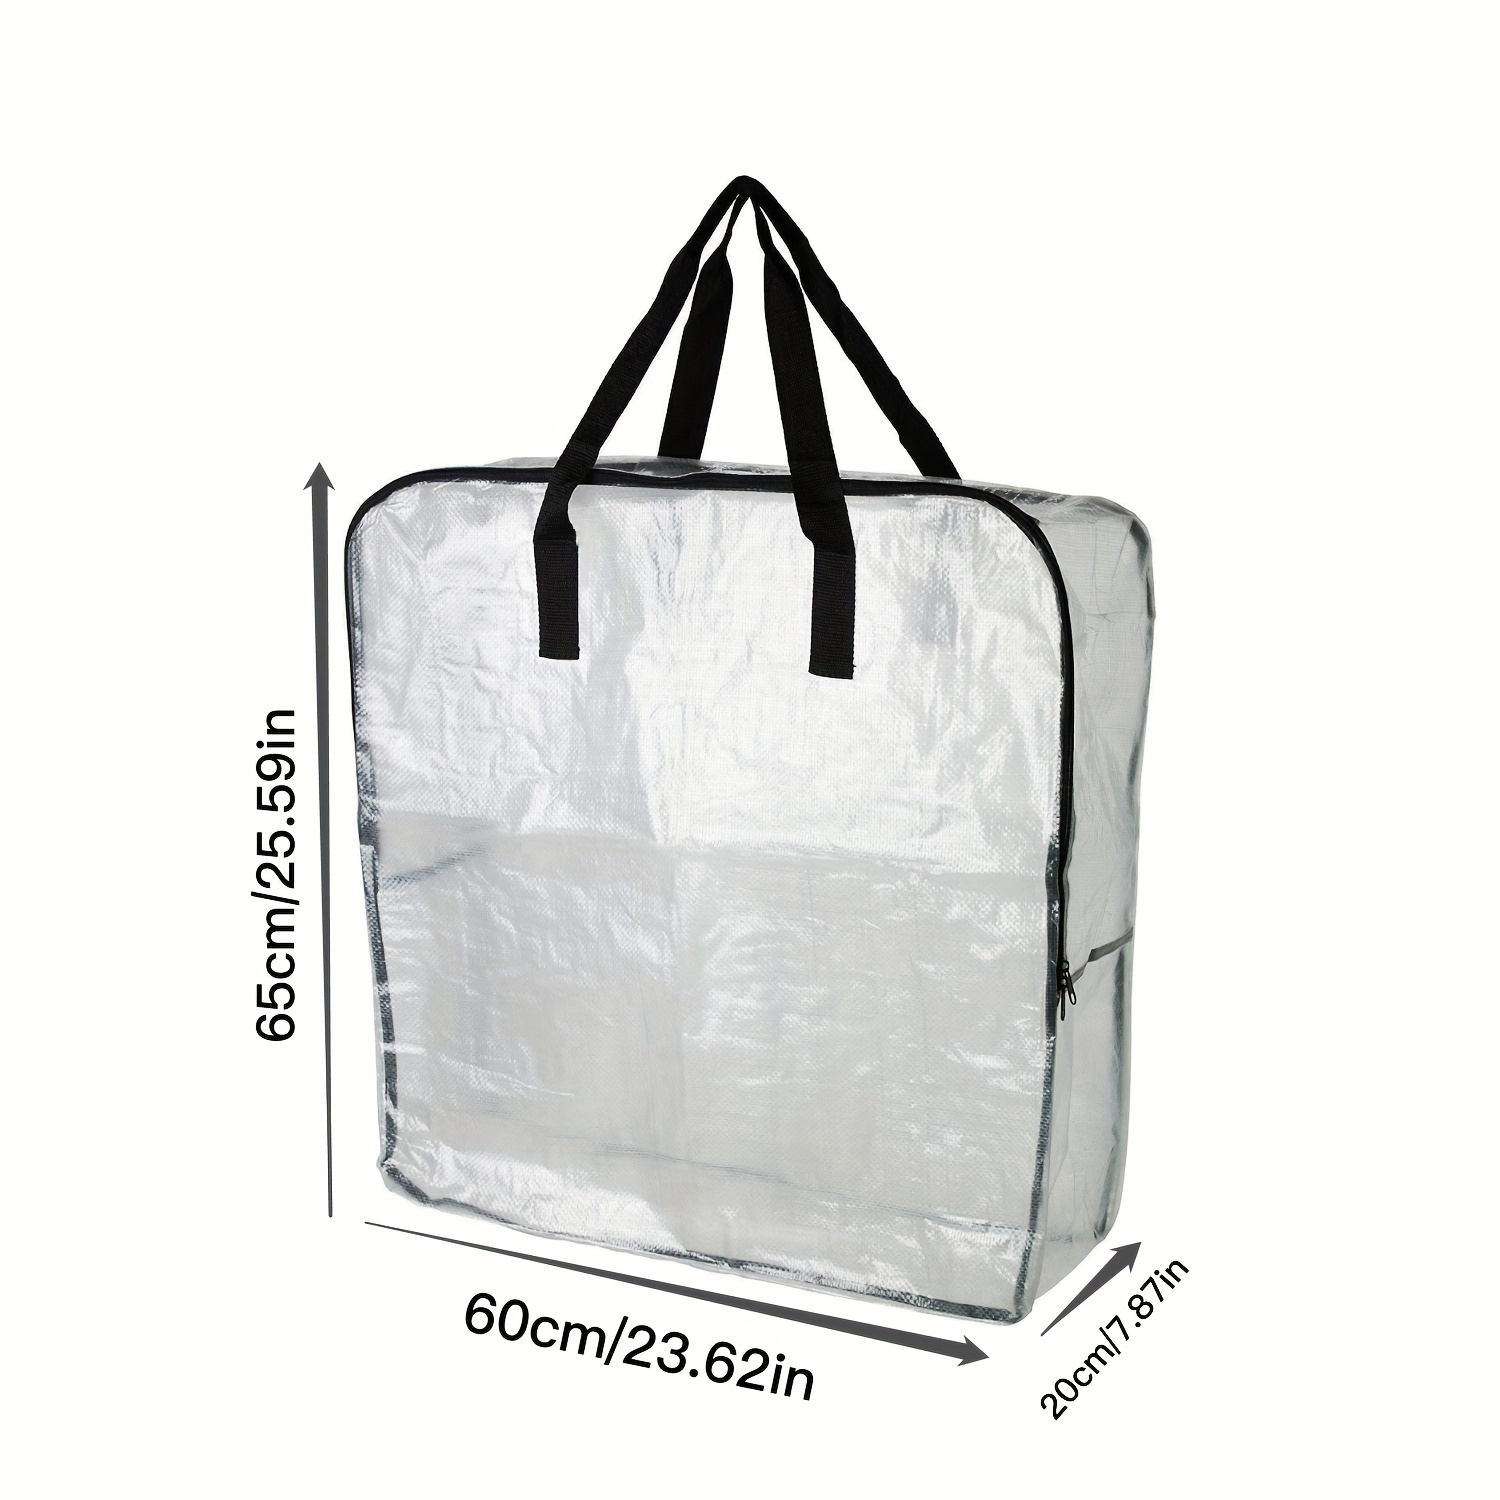 1pc Extra Large Strong And Durable Moving Packing Bags, Reusable Store Zip  Bag, High Capacity Clothes Storage Bag